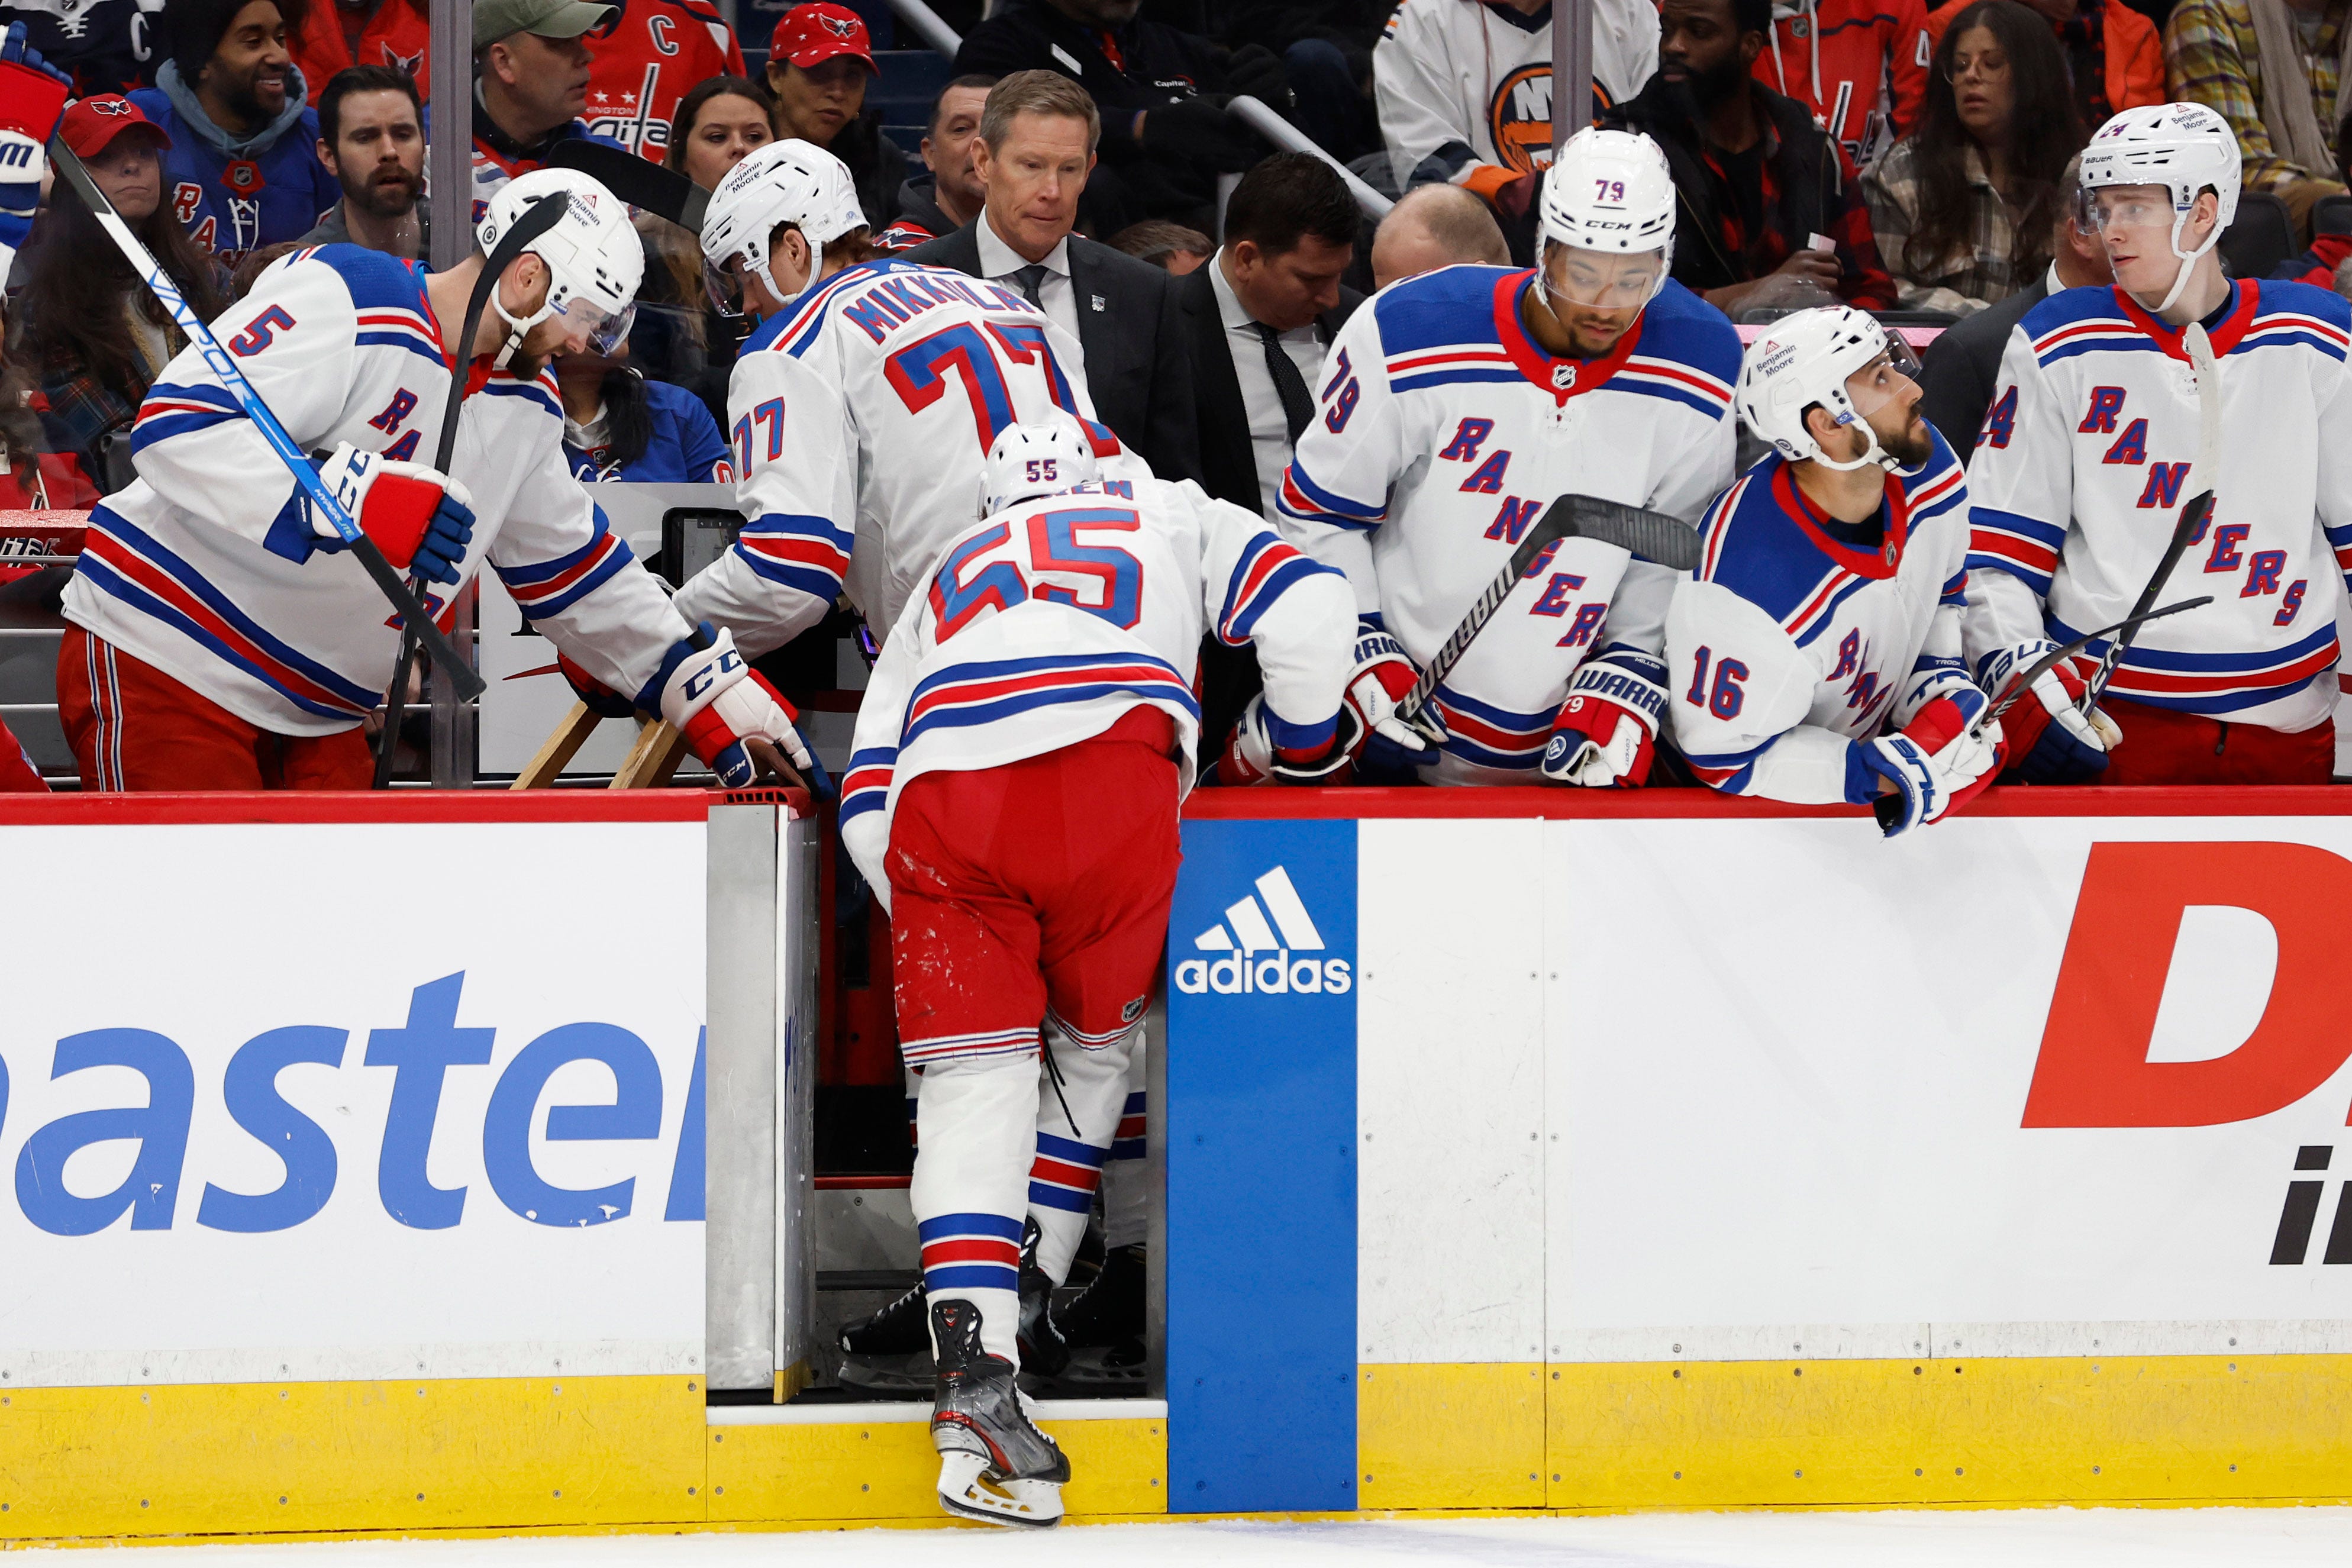 Rangers defenseman Ryan Lindgren leaves game with injury after hit by Capitals' T.J. Oshie